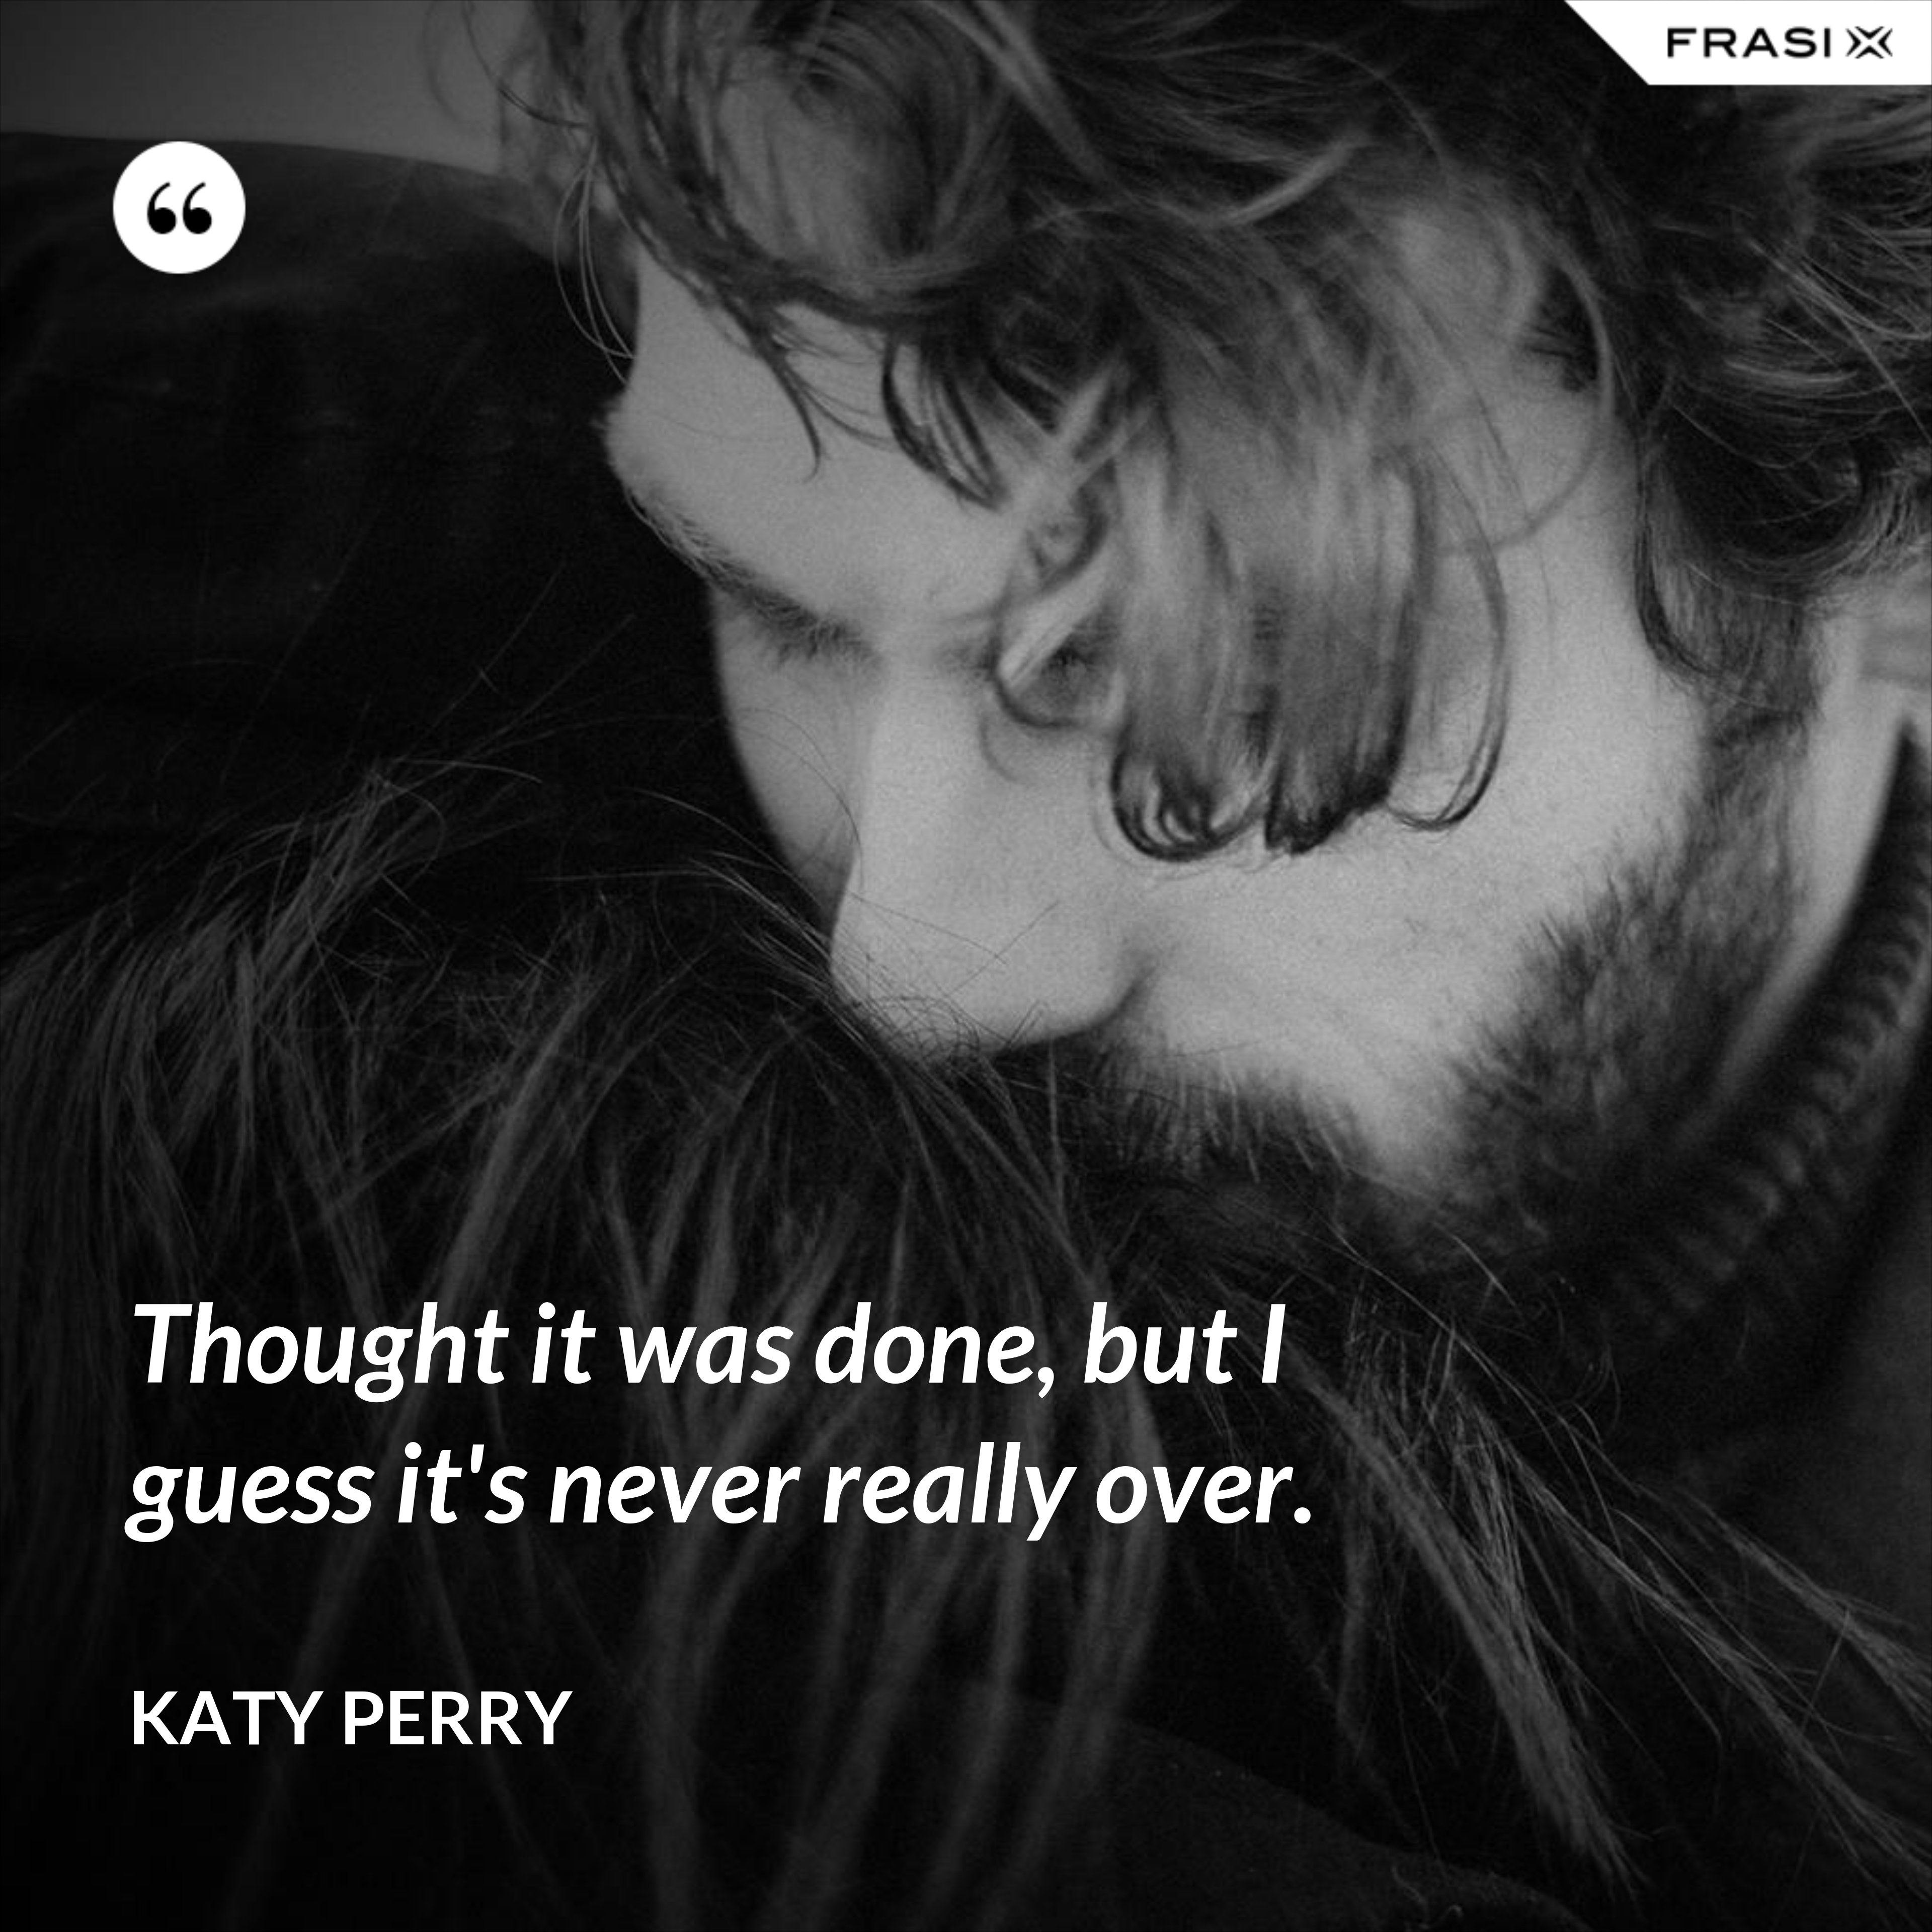 Thought it was done, but I guess it's never really over. - Katy Perry